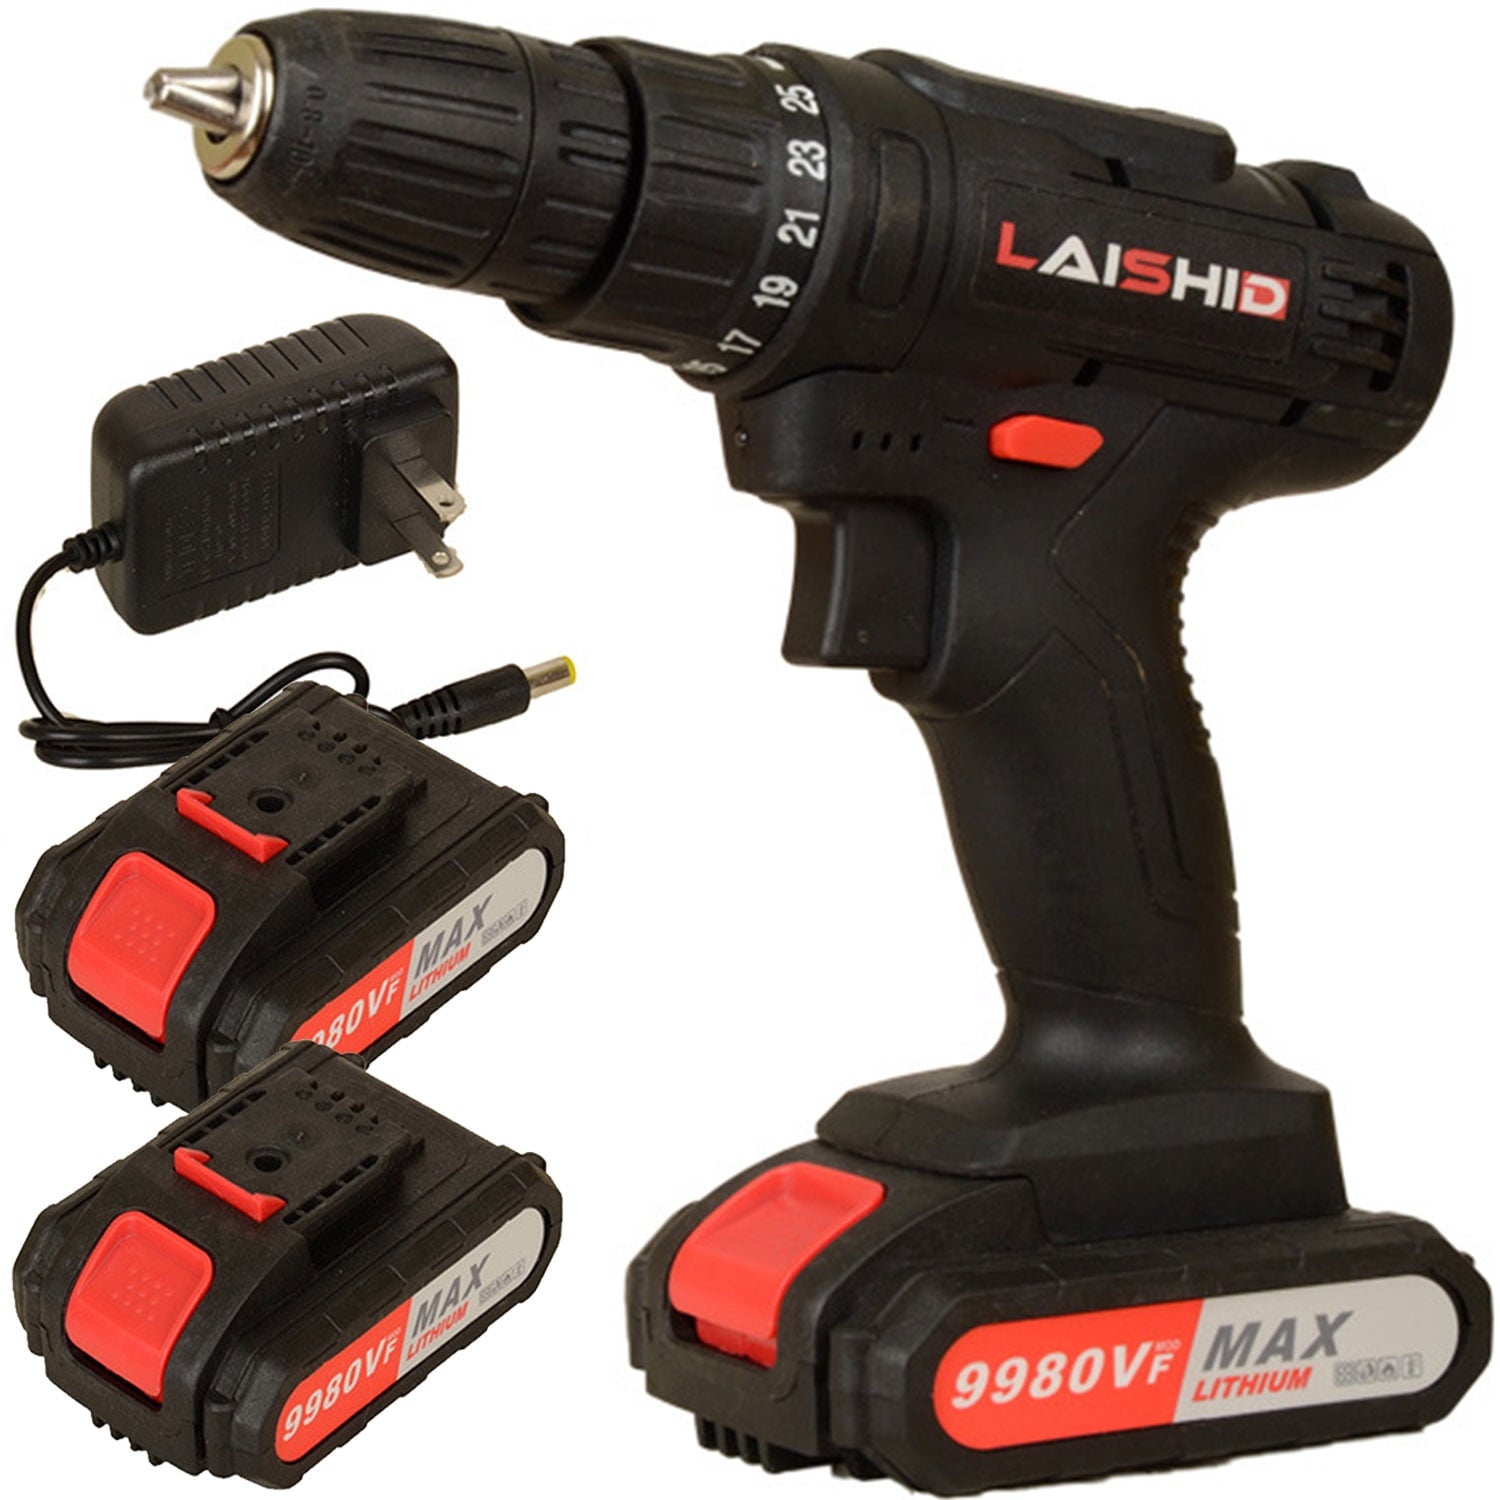 Cordless Electric Drill Driver 21V Cordless Drill with Dual Battery and  Charger